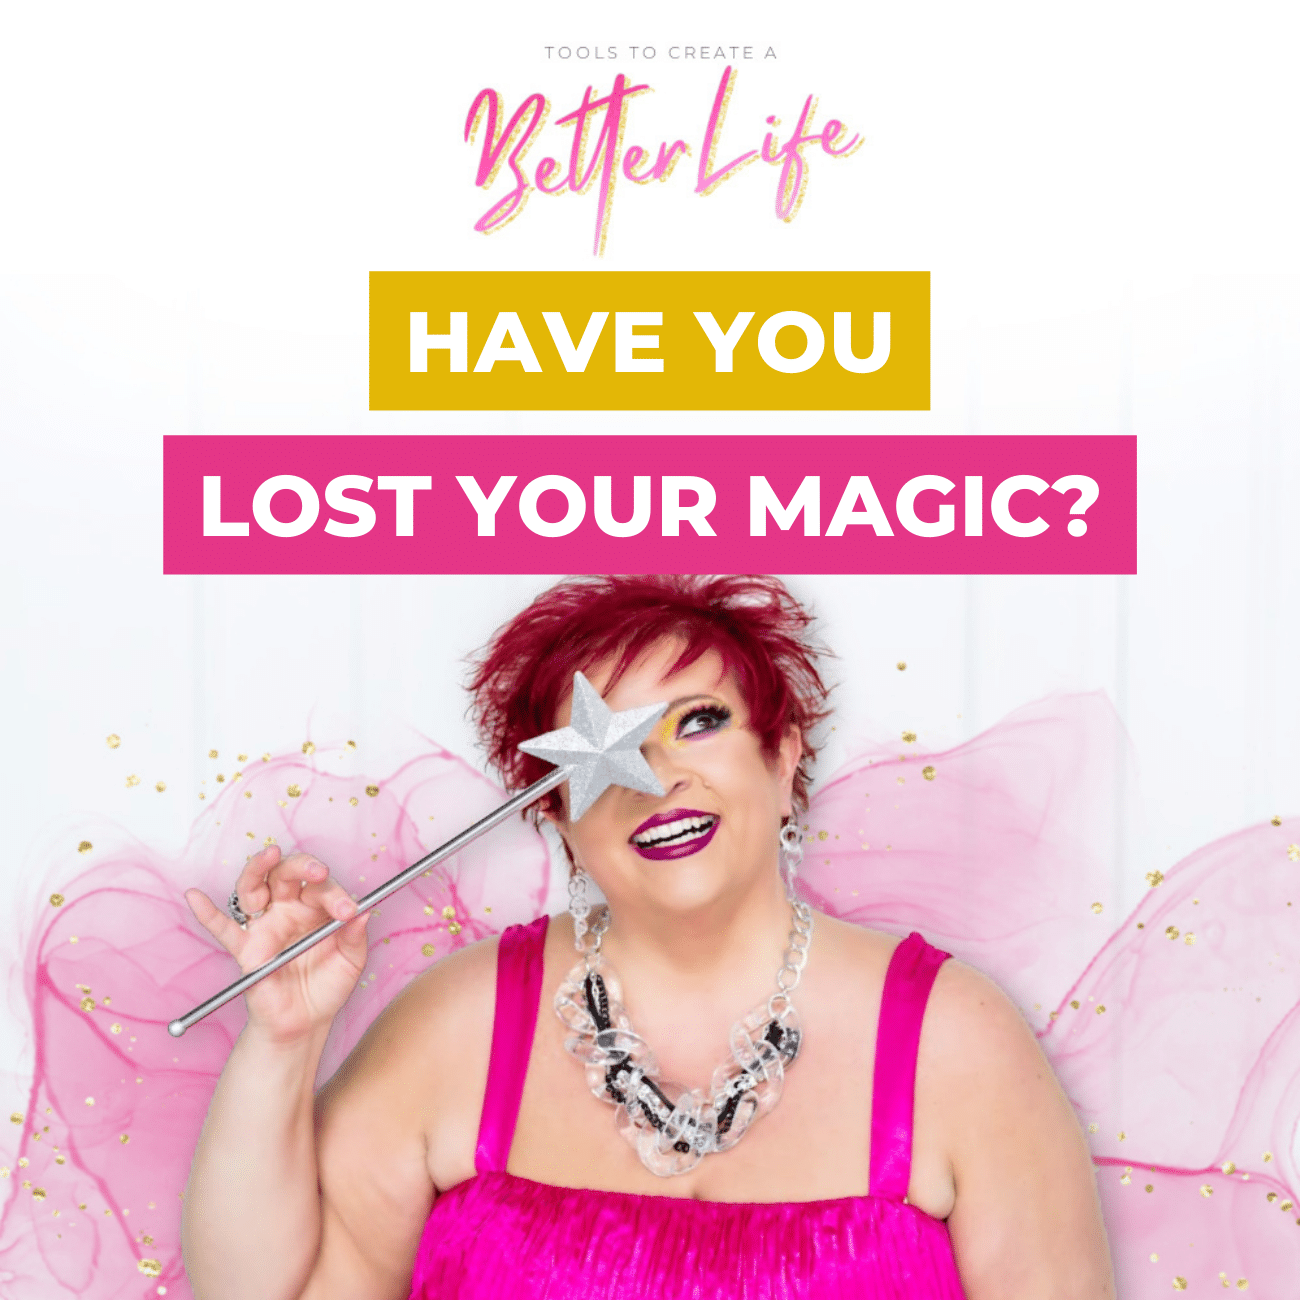 Have You Lost Your Magic?